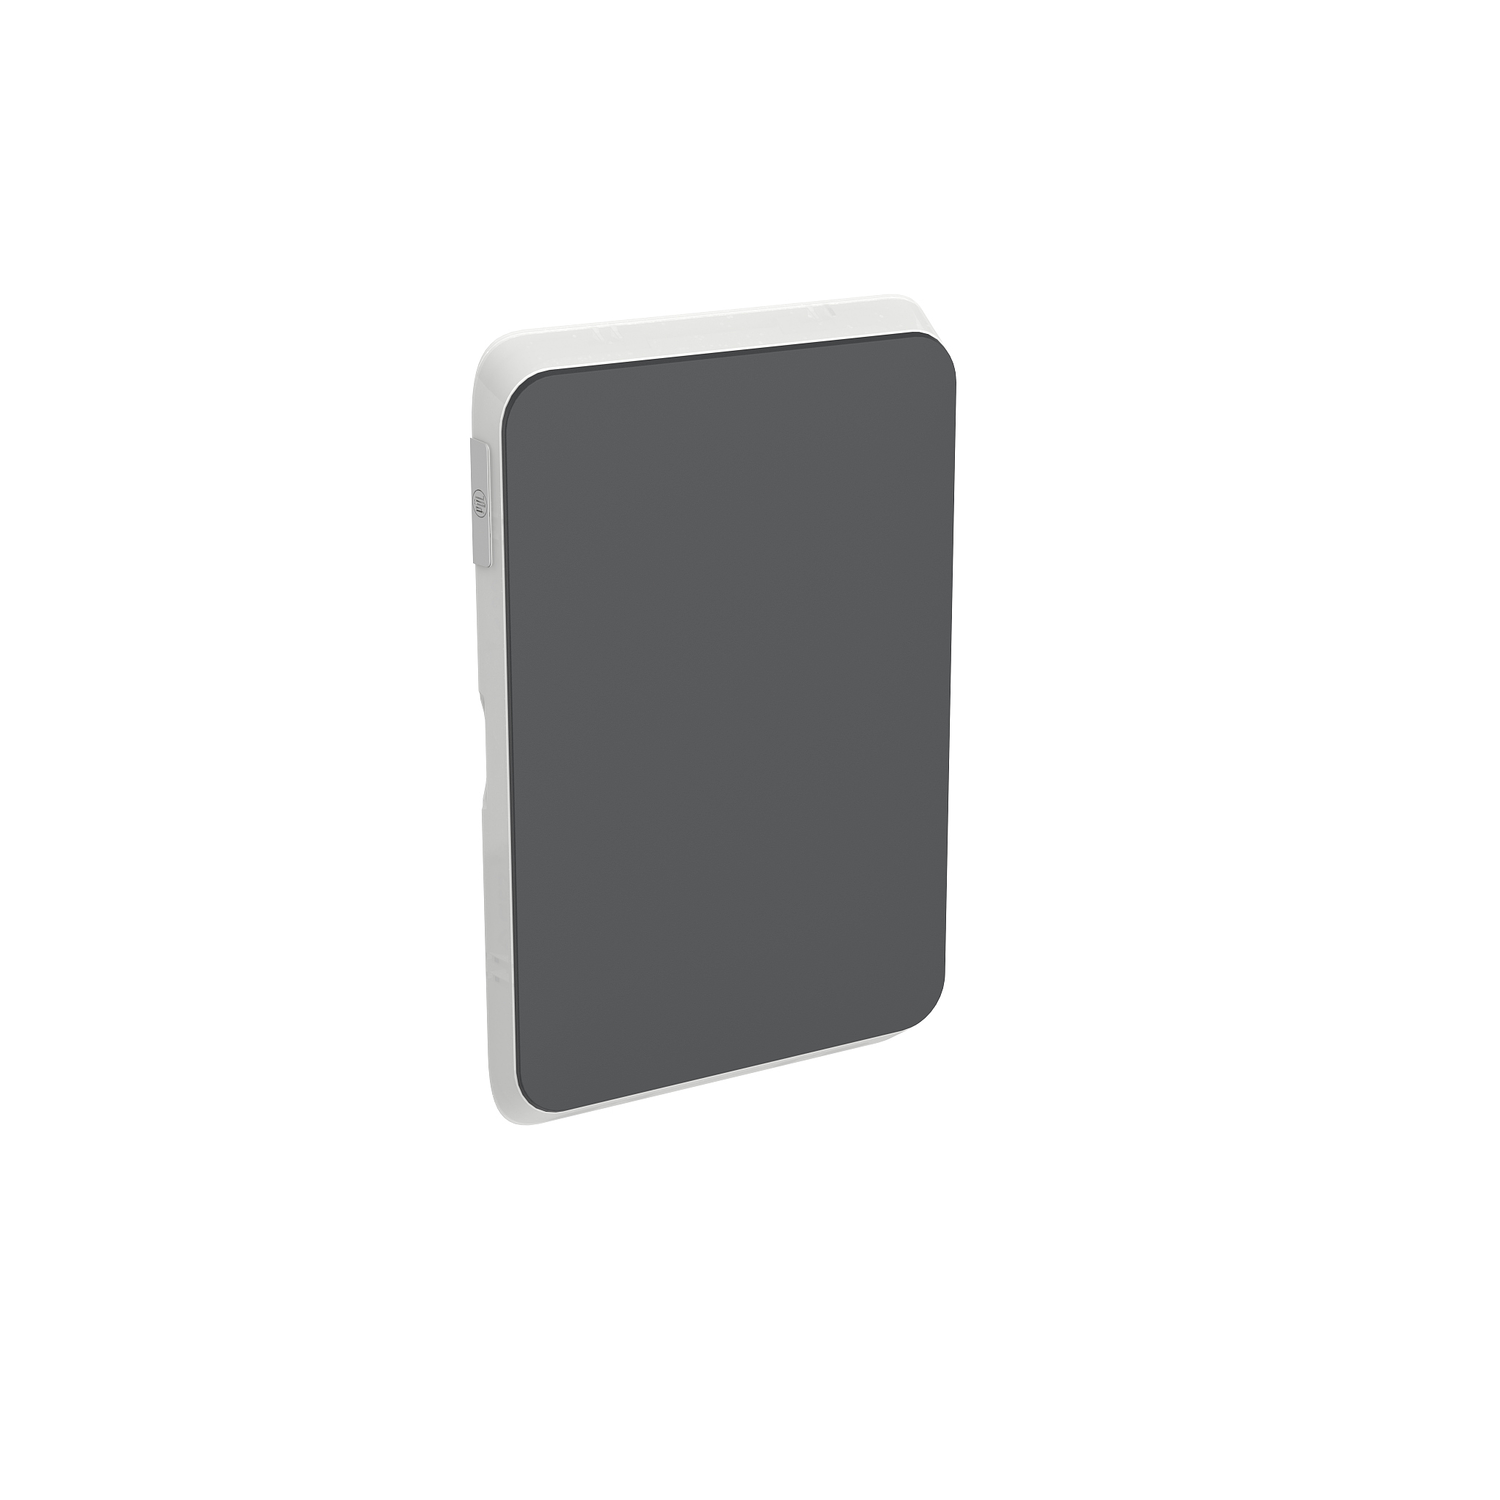 PDL Iconic - Cover Plate Blank Plate - Anthracite